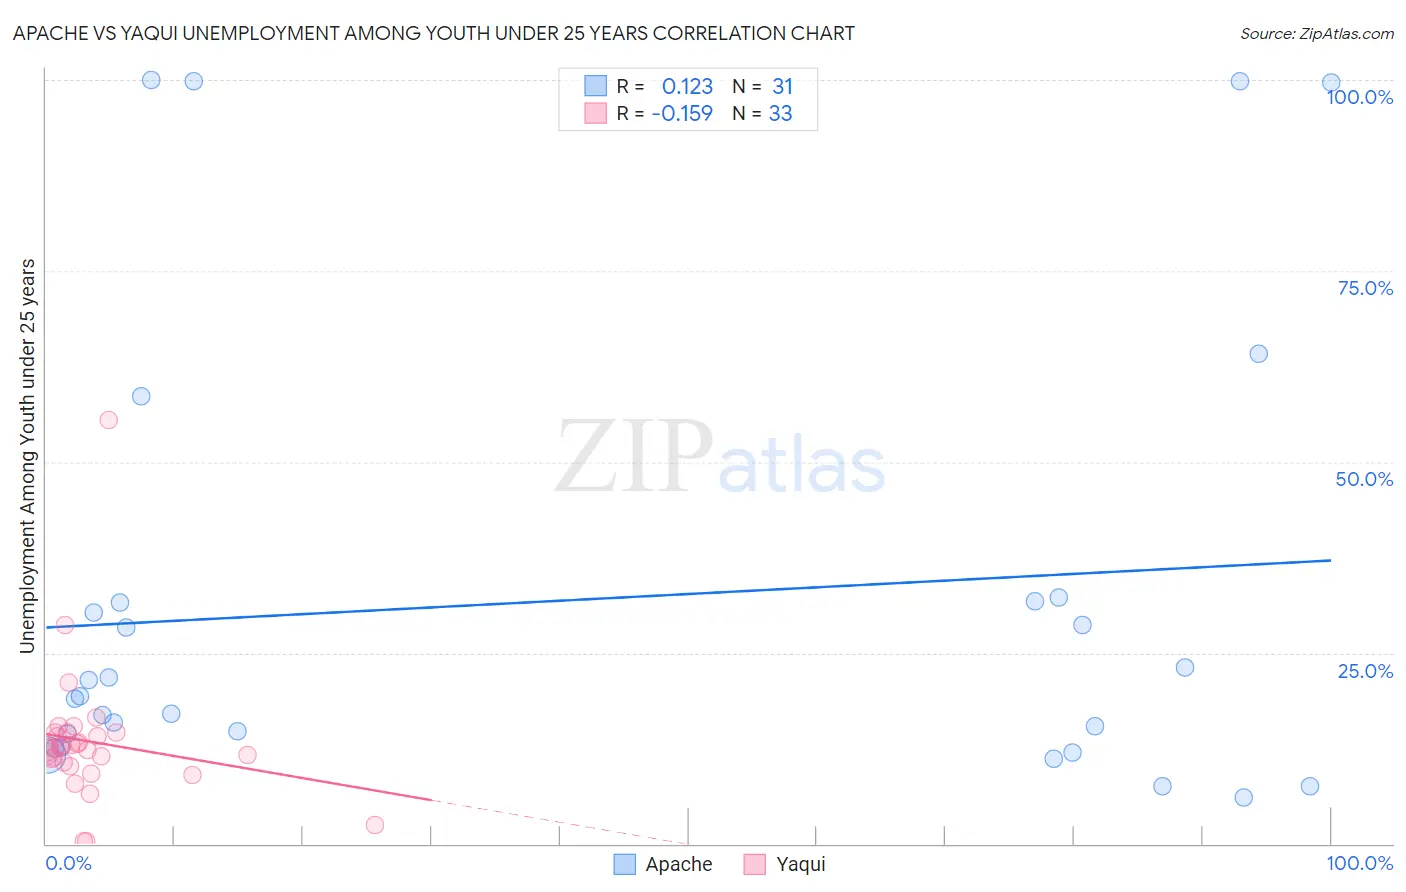 Apache vs Yaqui Unemployment Among Youth under 25 years